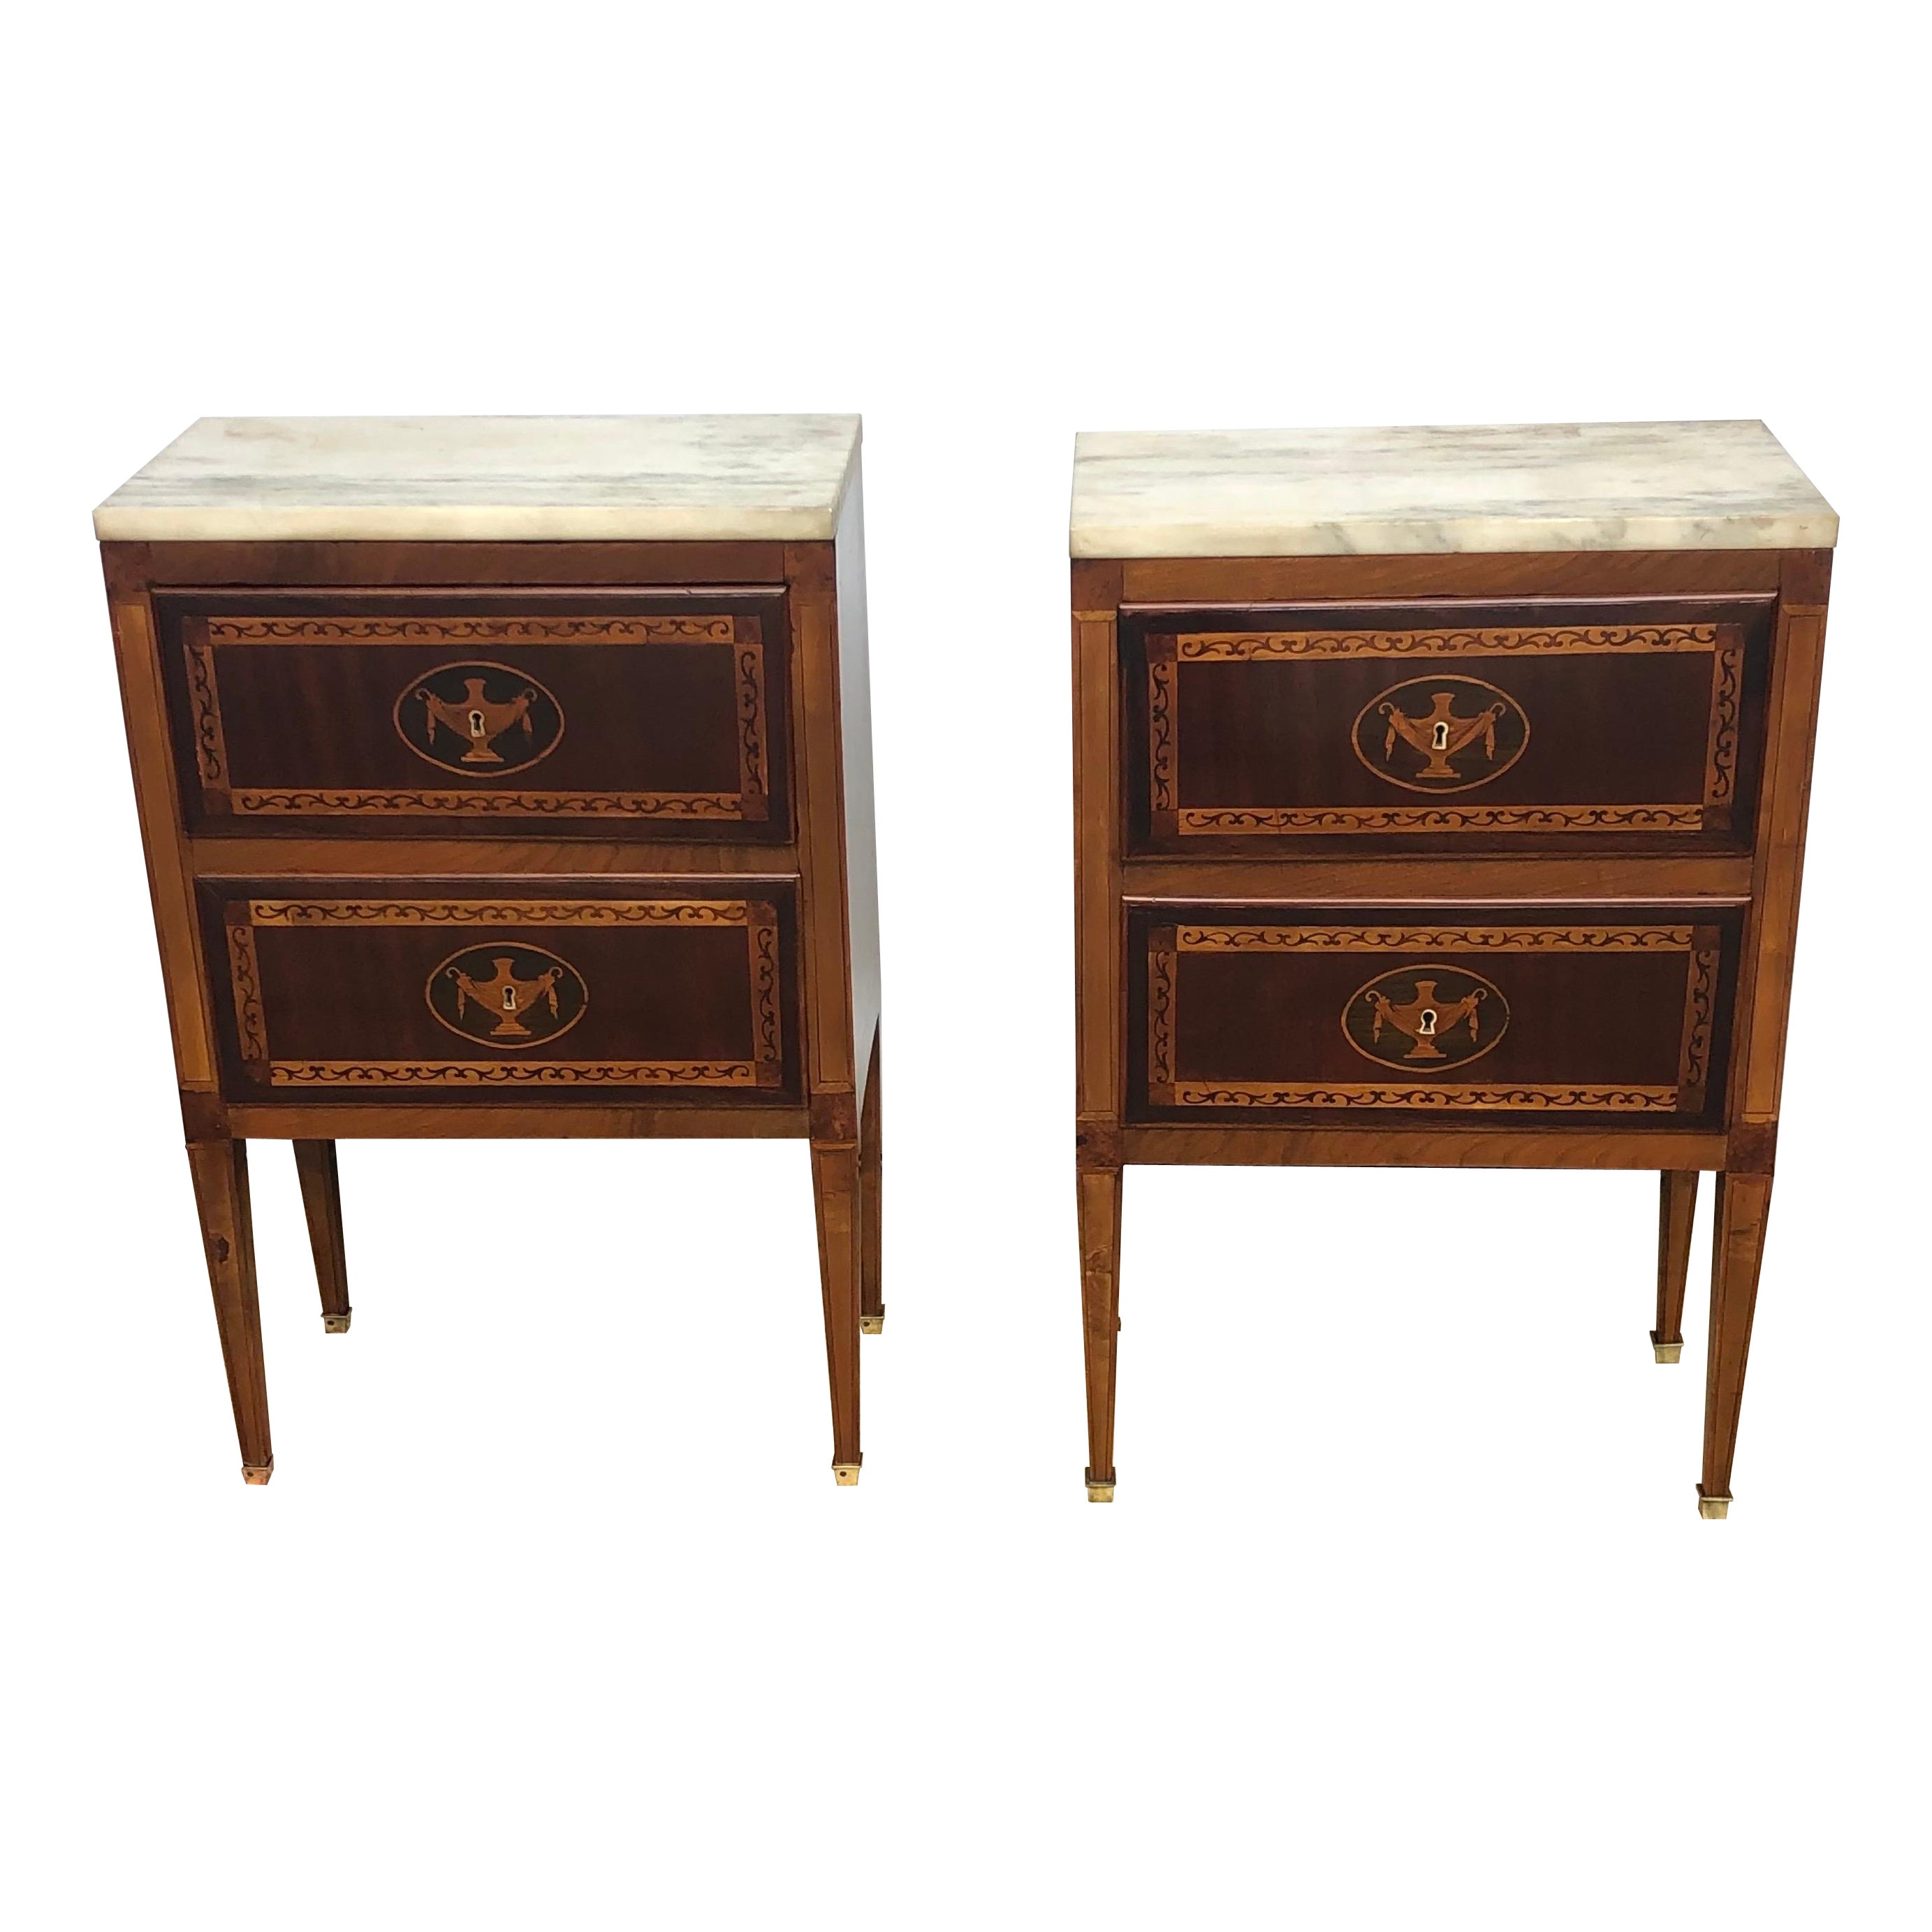 Italian Neoclassical Commode with Marble Top and Marquetry, 18th Century  For Sale